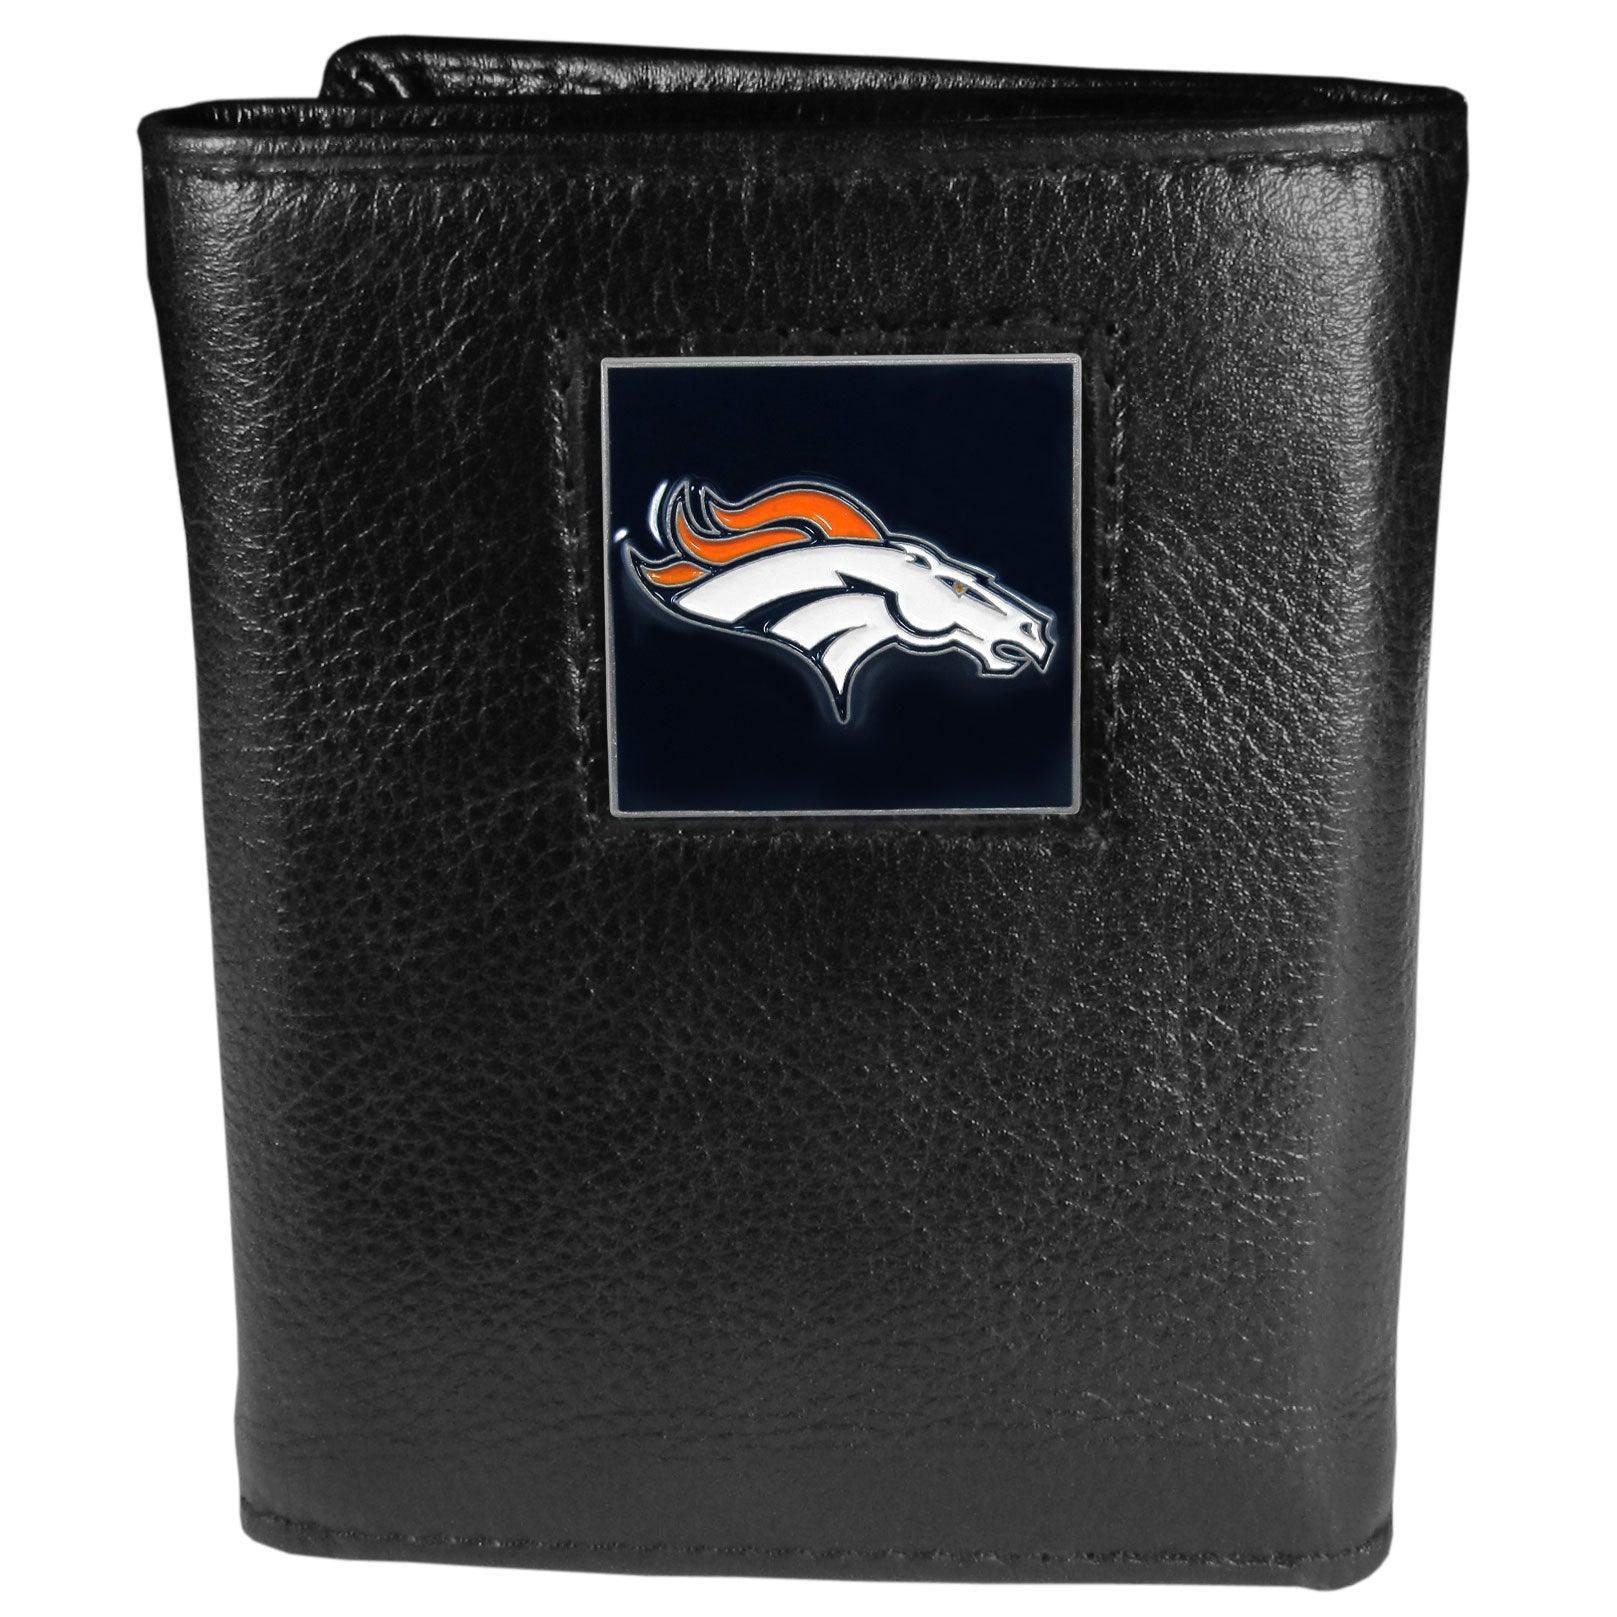 Denver Broncos Deluxe Leather Tri-fold Wallet Packaged in Gift Box - Flyclothing LLC